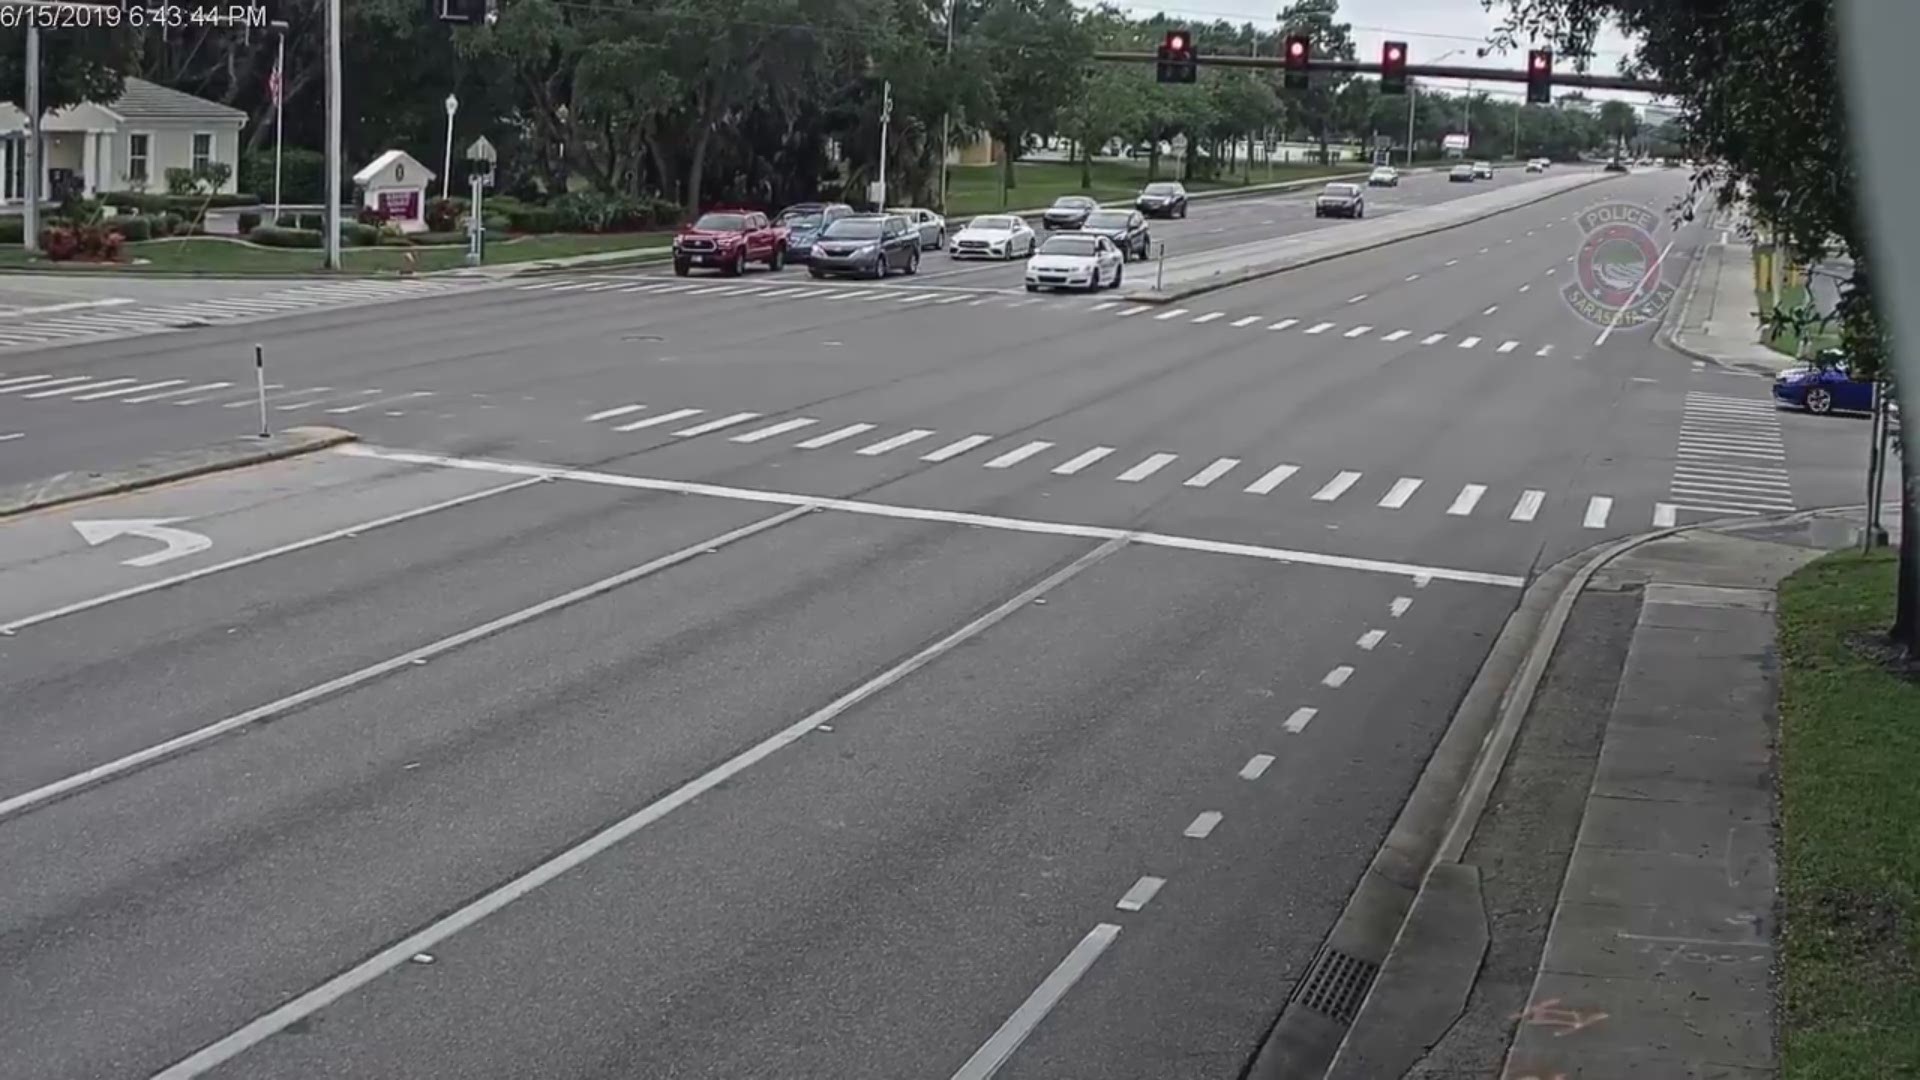 Sarasota police are reminding drivers to always #StopOnRed by sharing a video of a driver running a red light and hitting two other vehicles.

Police said the crash happened Saturday at the intersection of Fruitville Road and Lockwood Ridge Road. The department said there were no major injuries.

Police said the driver who ran the red light received a citation.